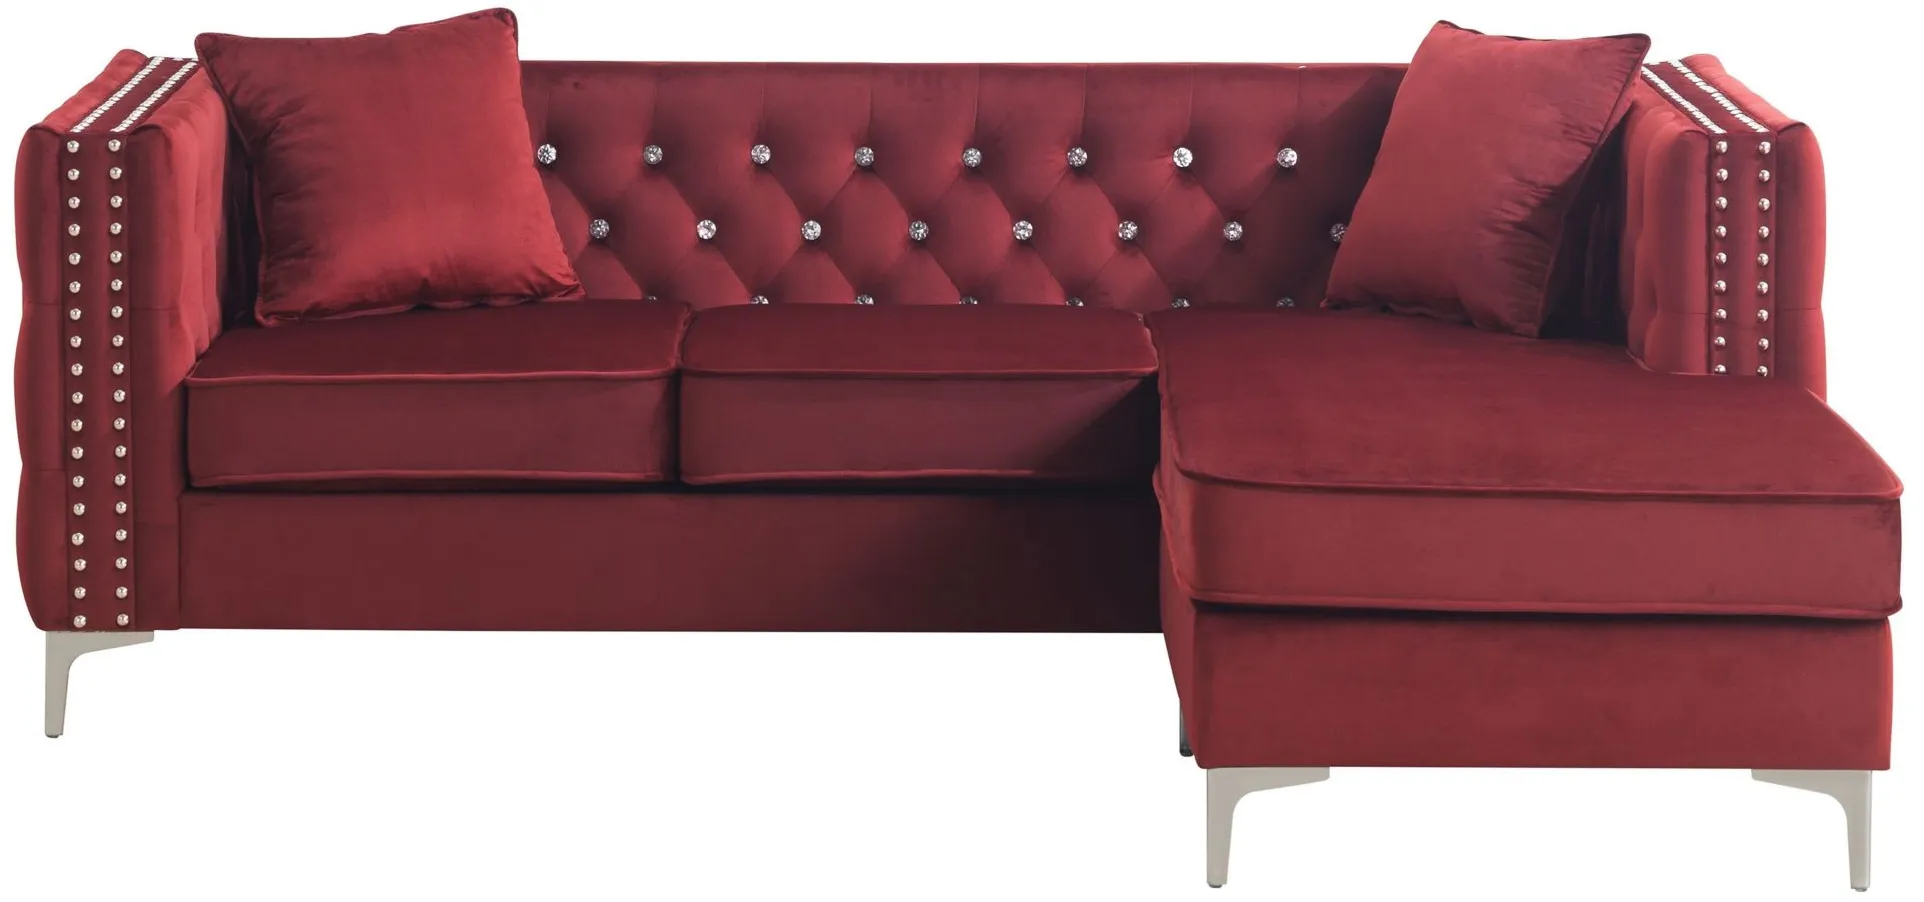 Paige Sofa Chaise in Burgundy by Glory Furniture